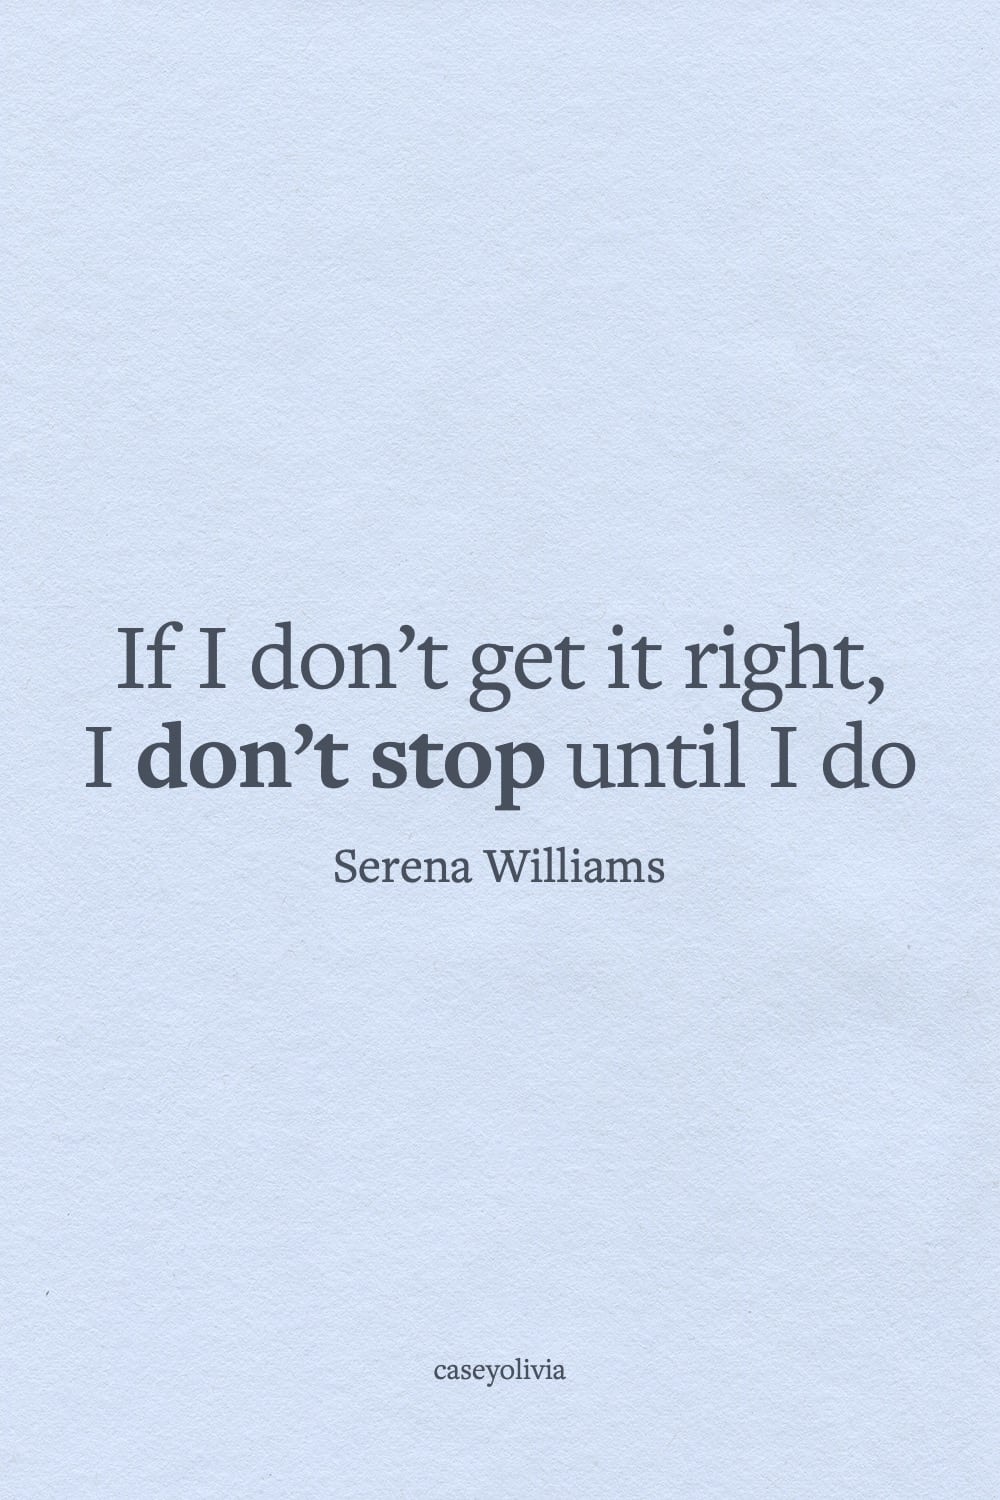 dont stop until you get it right short saying for instagram